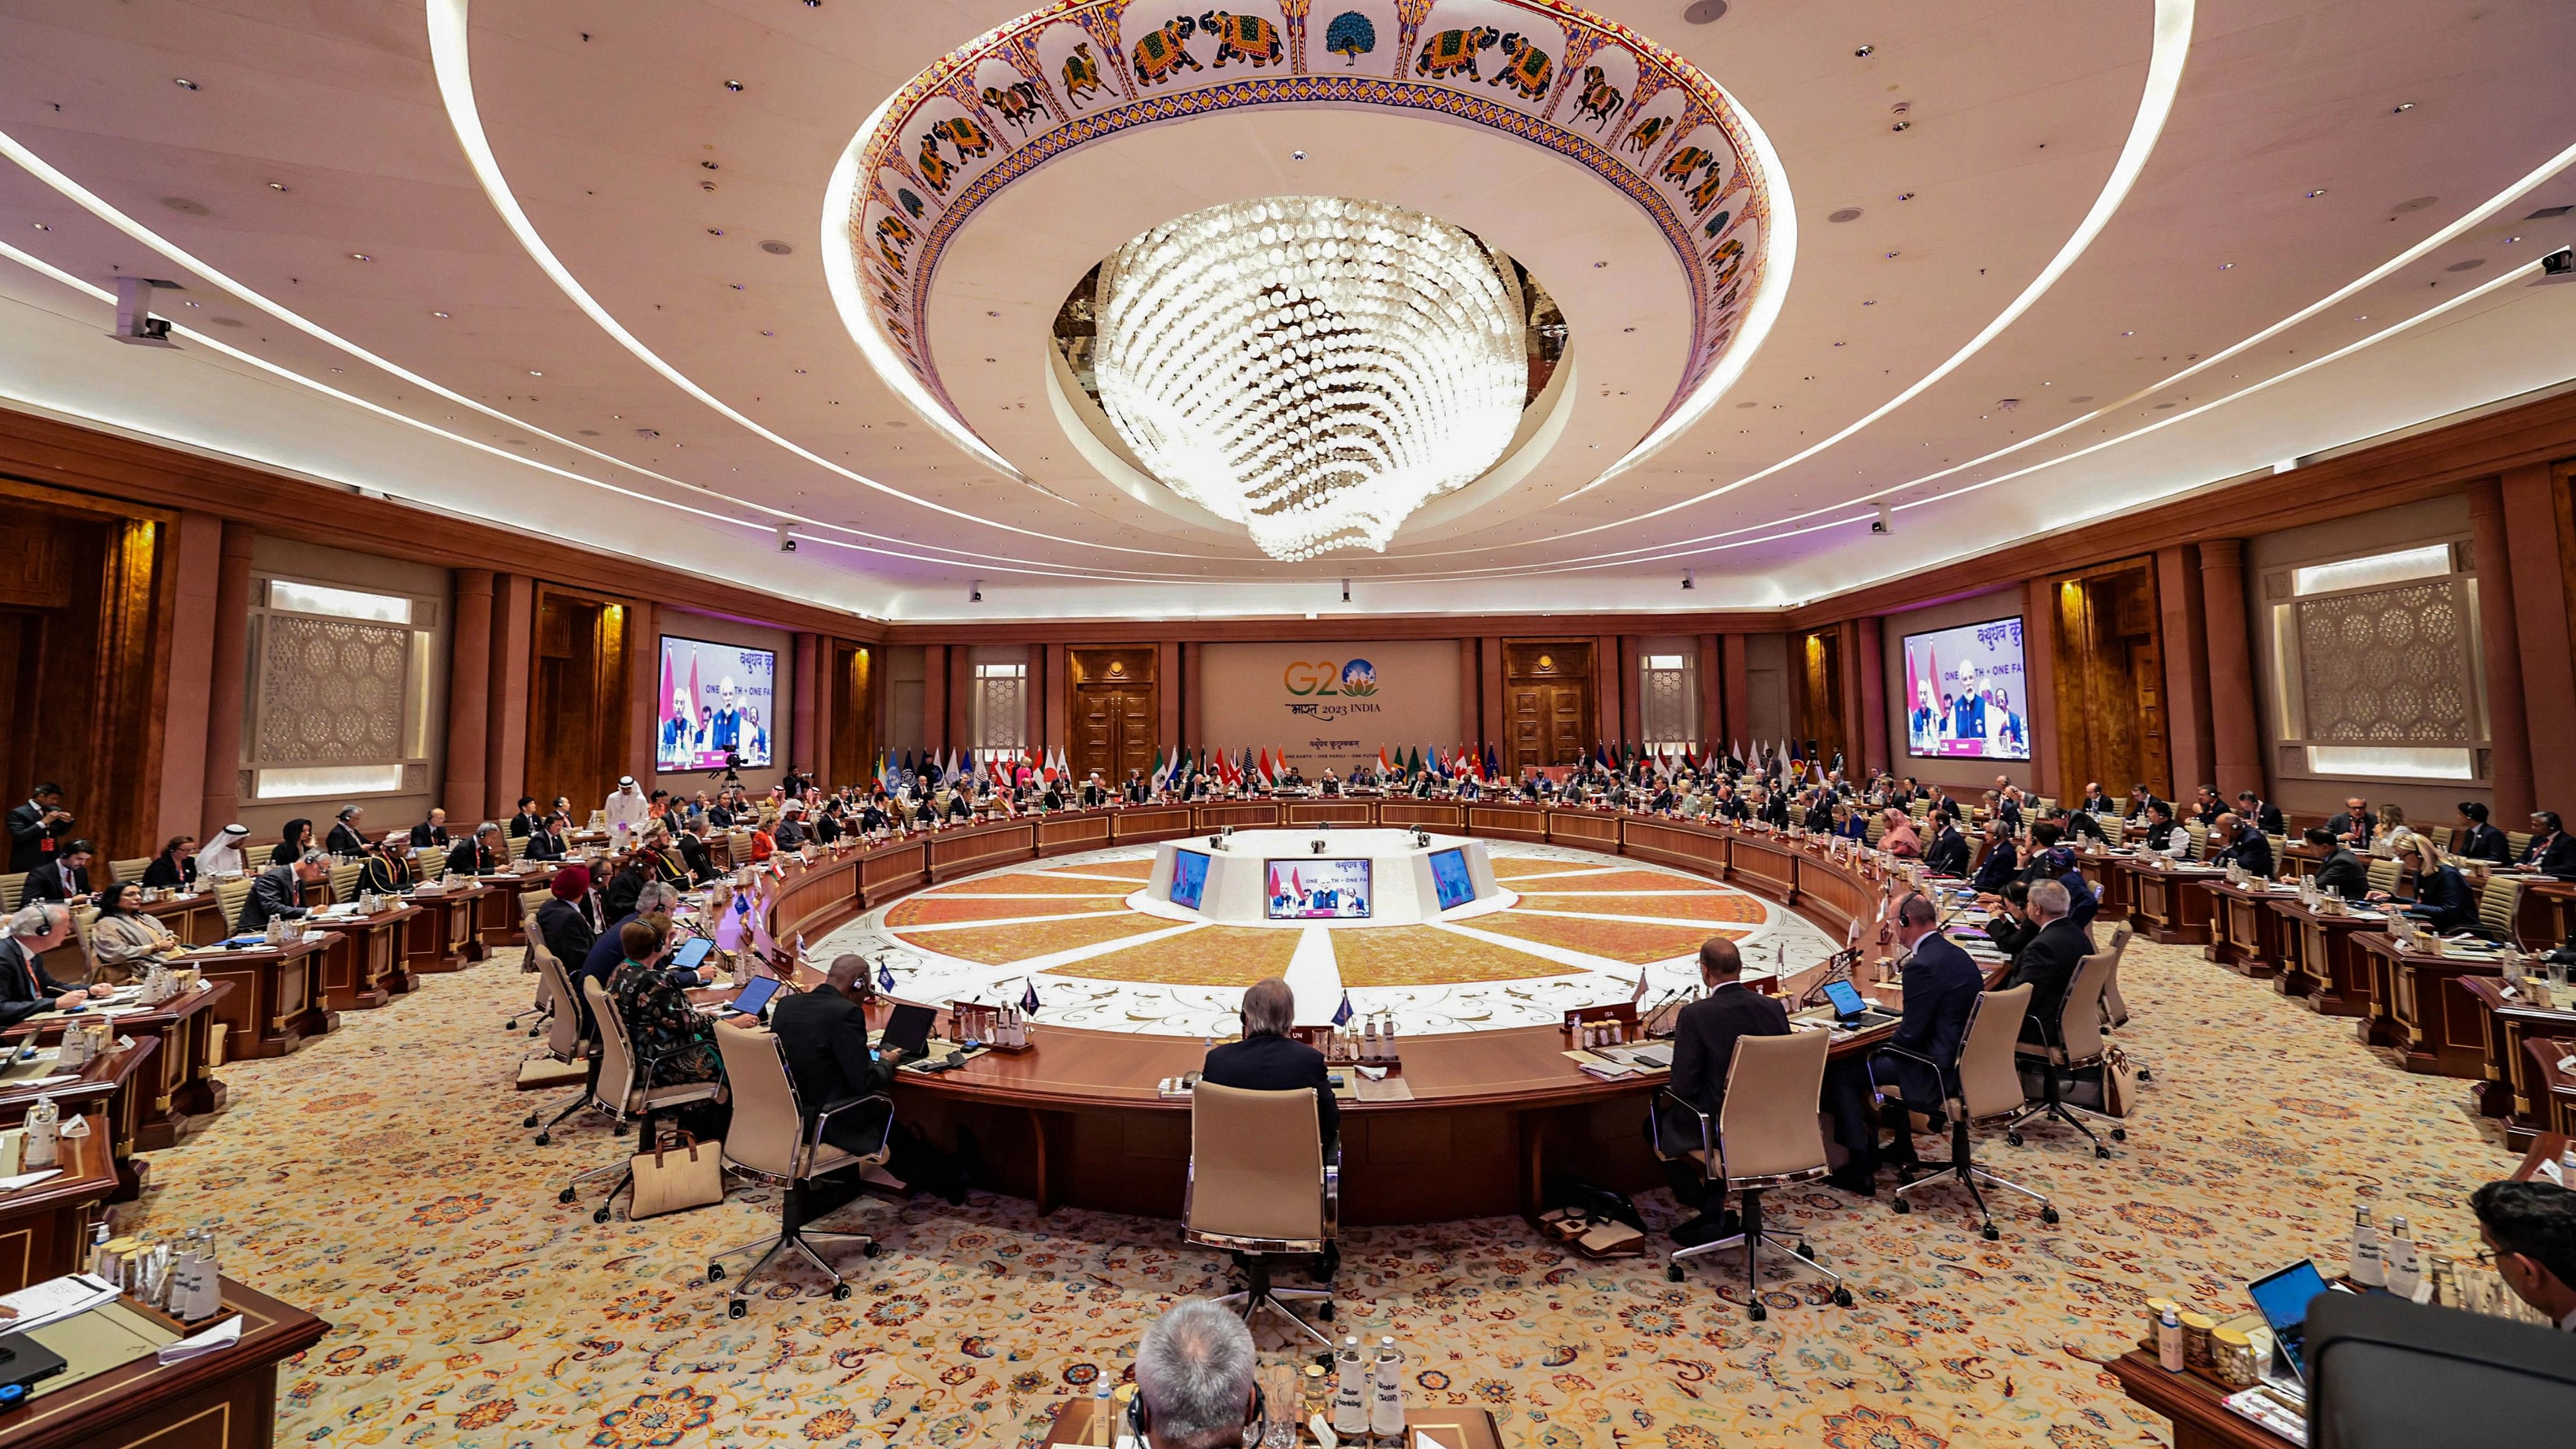 <div class="paragraphs"><p>New Delhi: Leaders of the participating nations at session-1 on 'One Earth' during the G20 Summit 2023 at the Bharat Mandapam.</p></div>